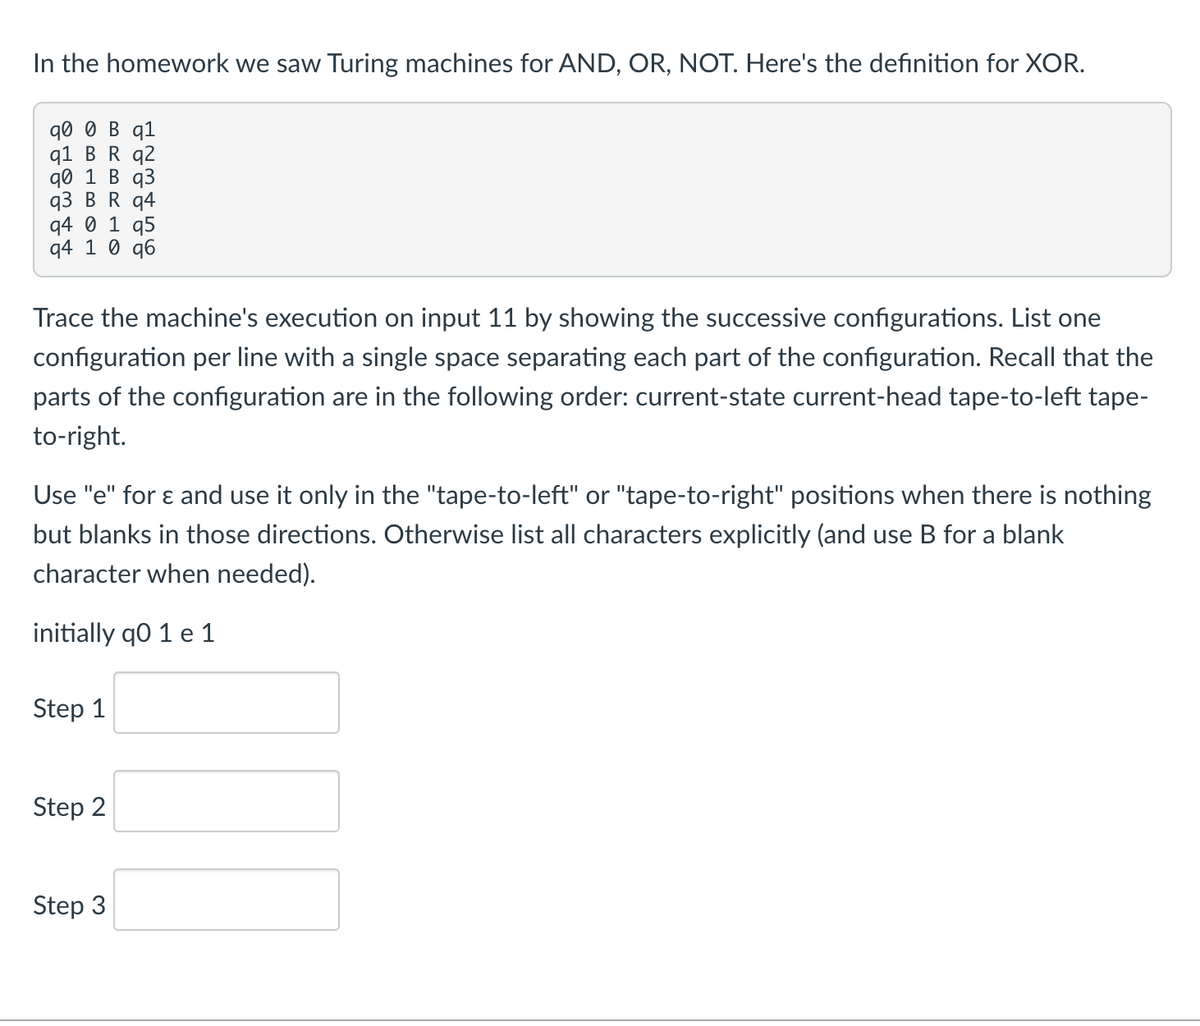 In the homework we saw Turing machines for AND, OR, NOT. Here's the definition for XOR.
q0 0 B q1
q1 BR q2
д0 1 В q3
q3 BR q4
q4 0 1 q5
q4 1 0 q6
Trace the machine's execution on input 11 by showing the successive configurations. List one
configuration per line with a single space separating each part of the configuration. Recall that the
parts of the configuration are in the following order: current-state current-head tape-to-left tape-
to-right.
Use "e" for ɛ and use it only in the "tape-to-left" or "tape-to-right" positions when there is nothing
but blanks in those directions. Otherwise list all characters explicitly (and use B for a blank
character when needed).
initially q0 1 e 1
Step 1
Step 2
Step 3
